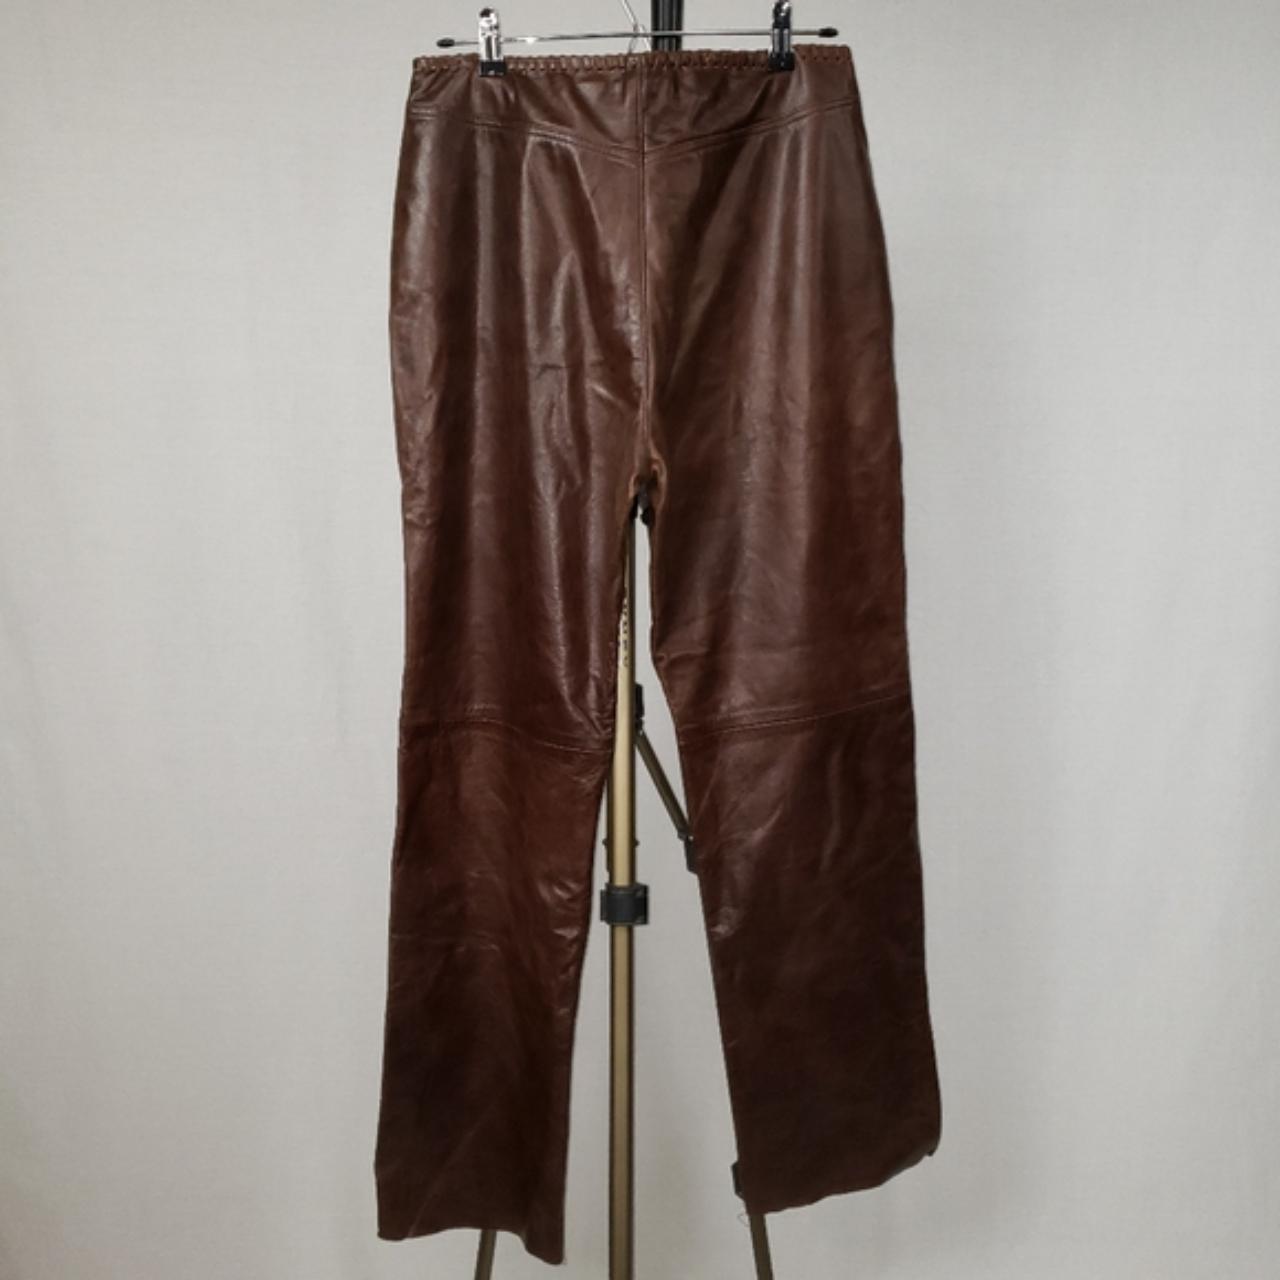 Cute brown leather pants by Liz Claiborne. Leather... - Depop